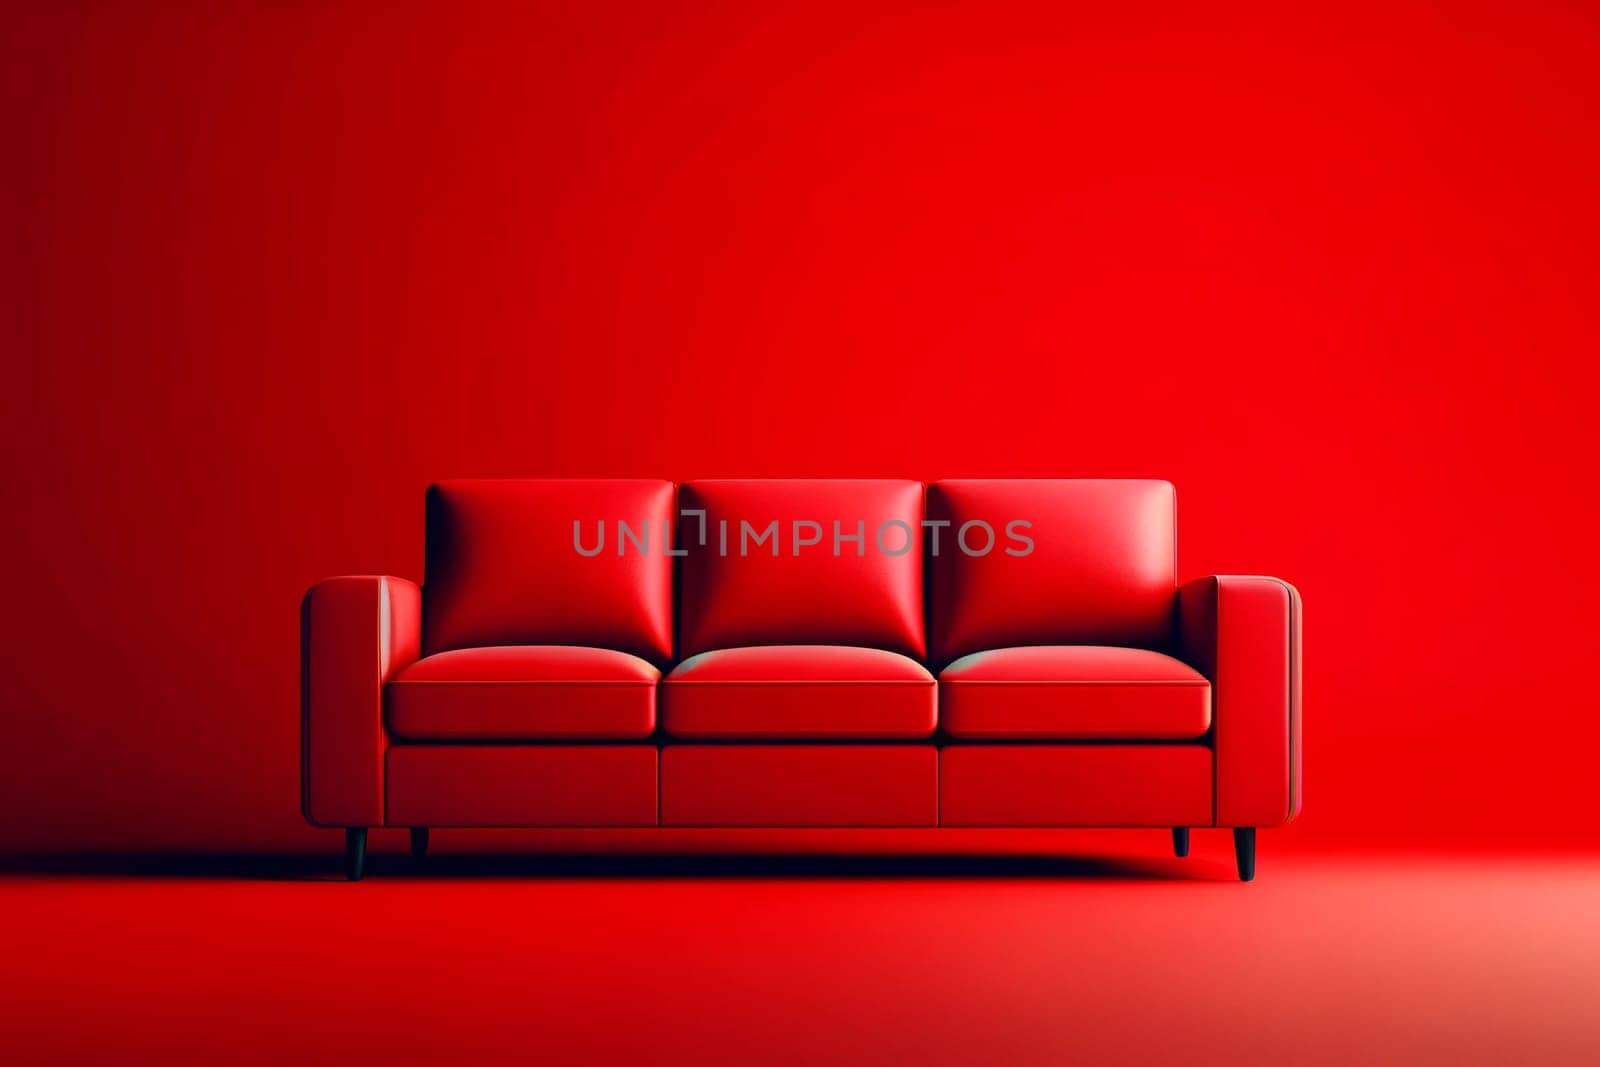 red leather sofa on a red background.